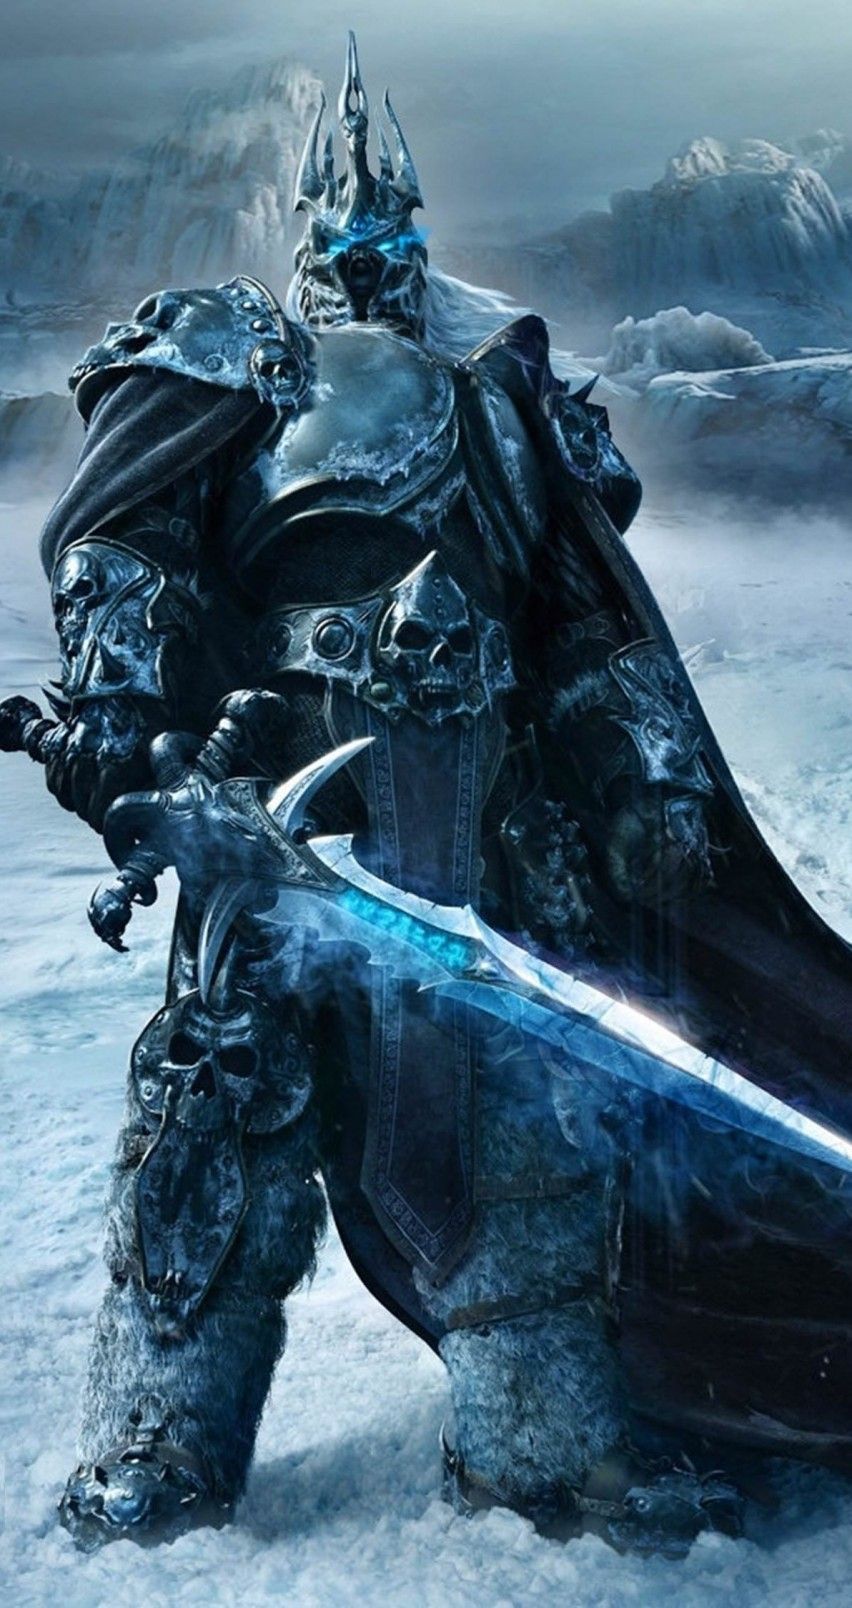 Download World of Warcraft Wrath of the Lich King HD wallpaper